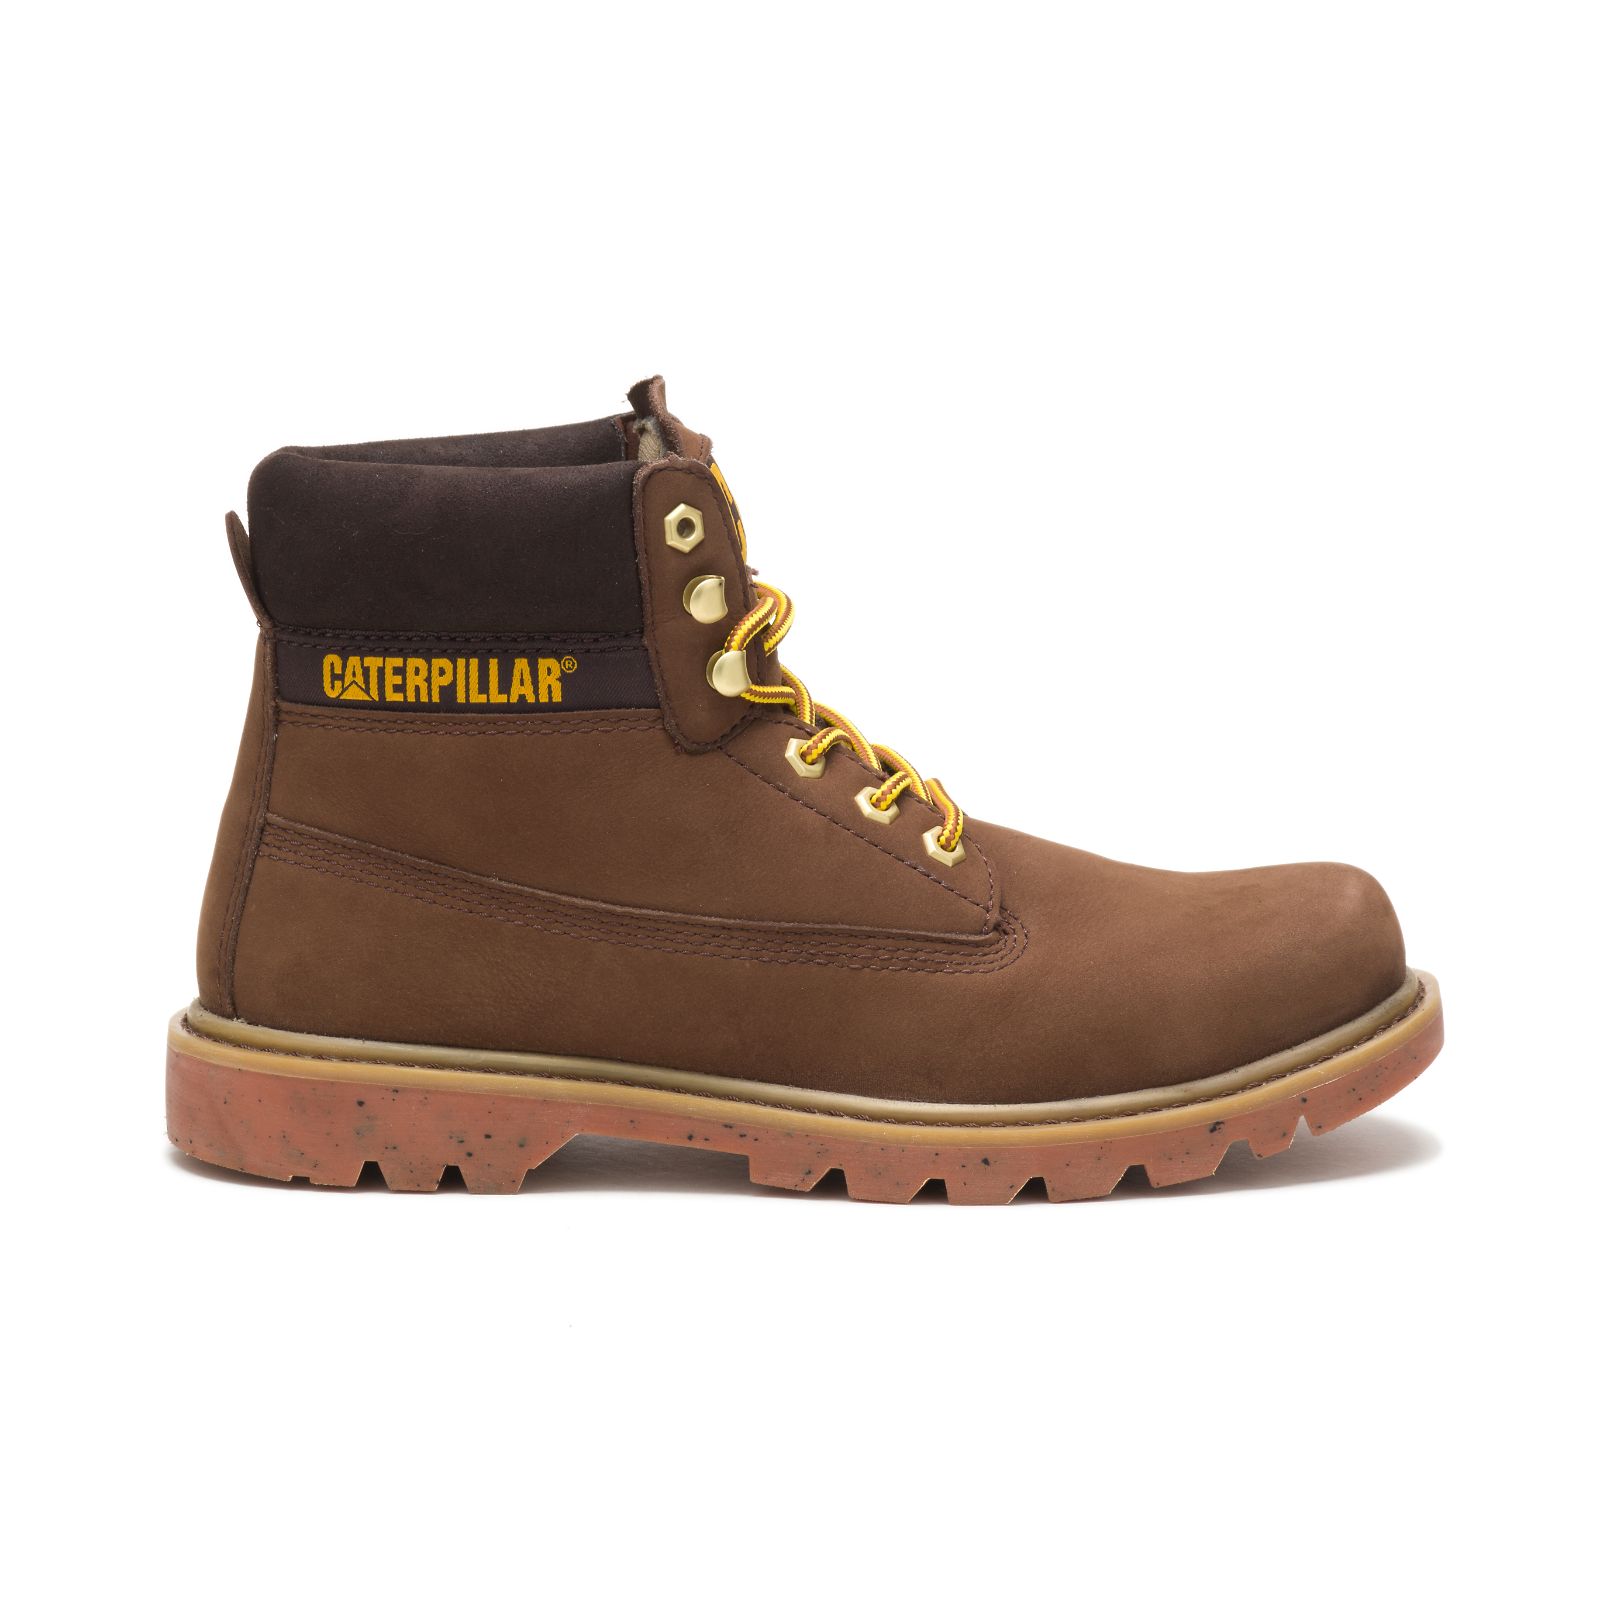 Caterpillar Ecolorado Philippines - Womens Casual Boots - Brown 46017THVL